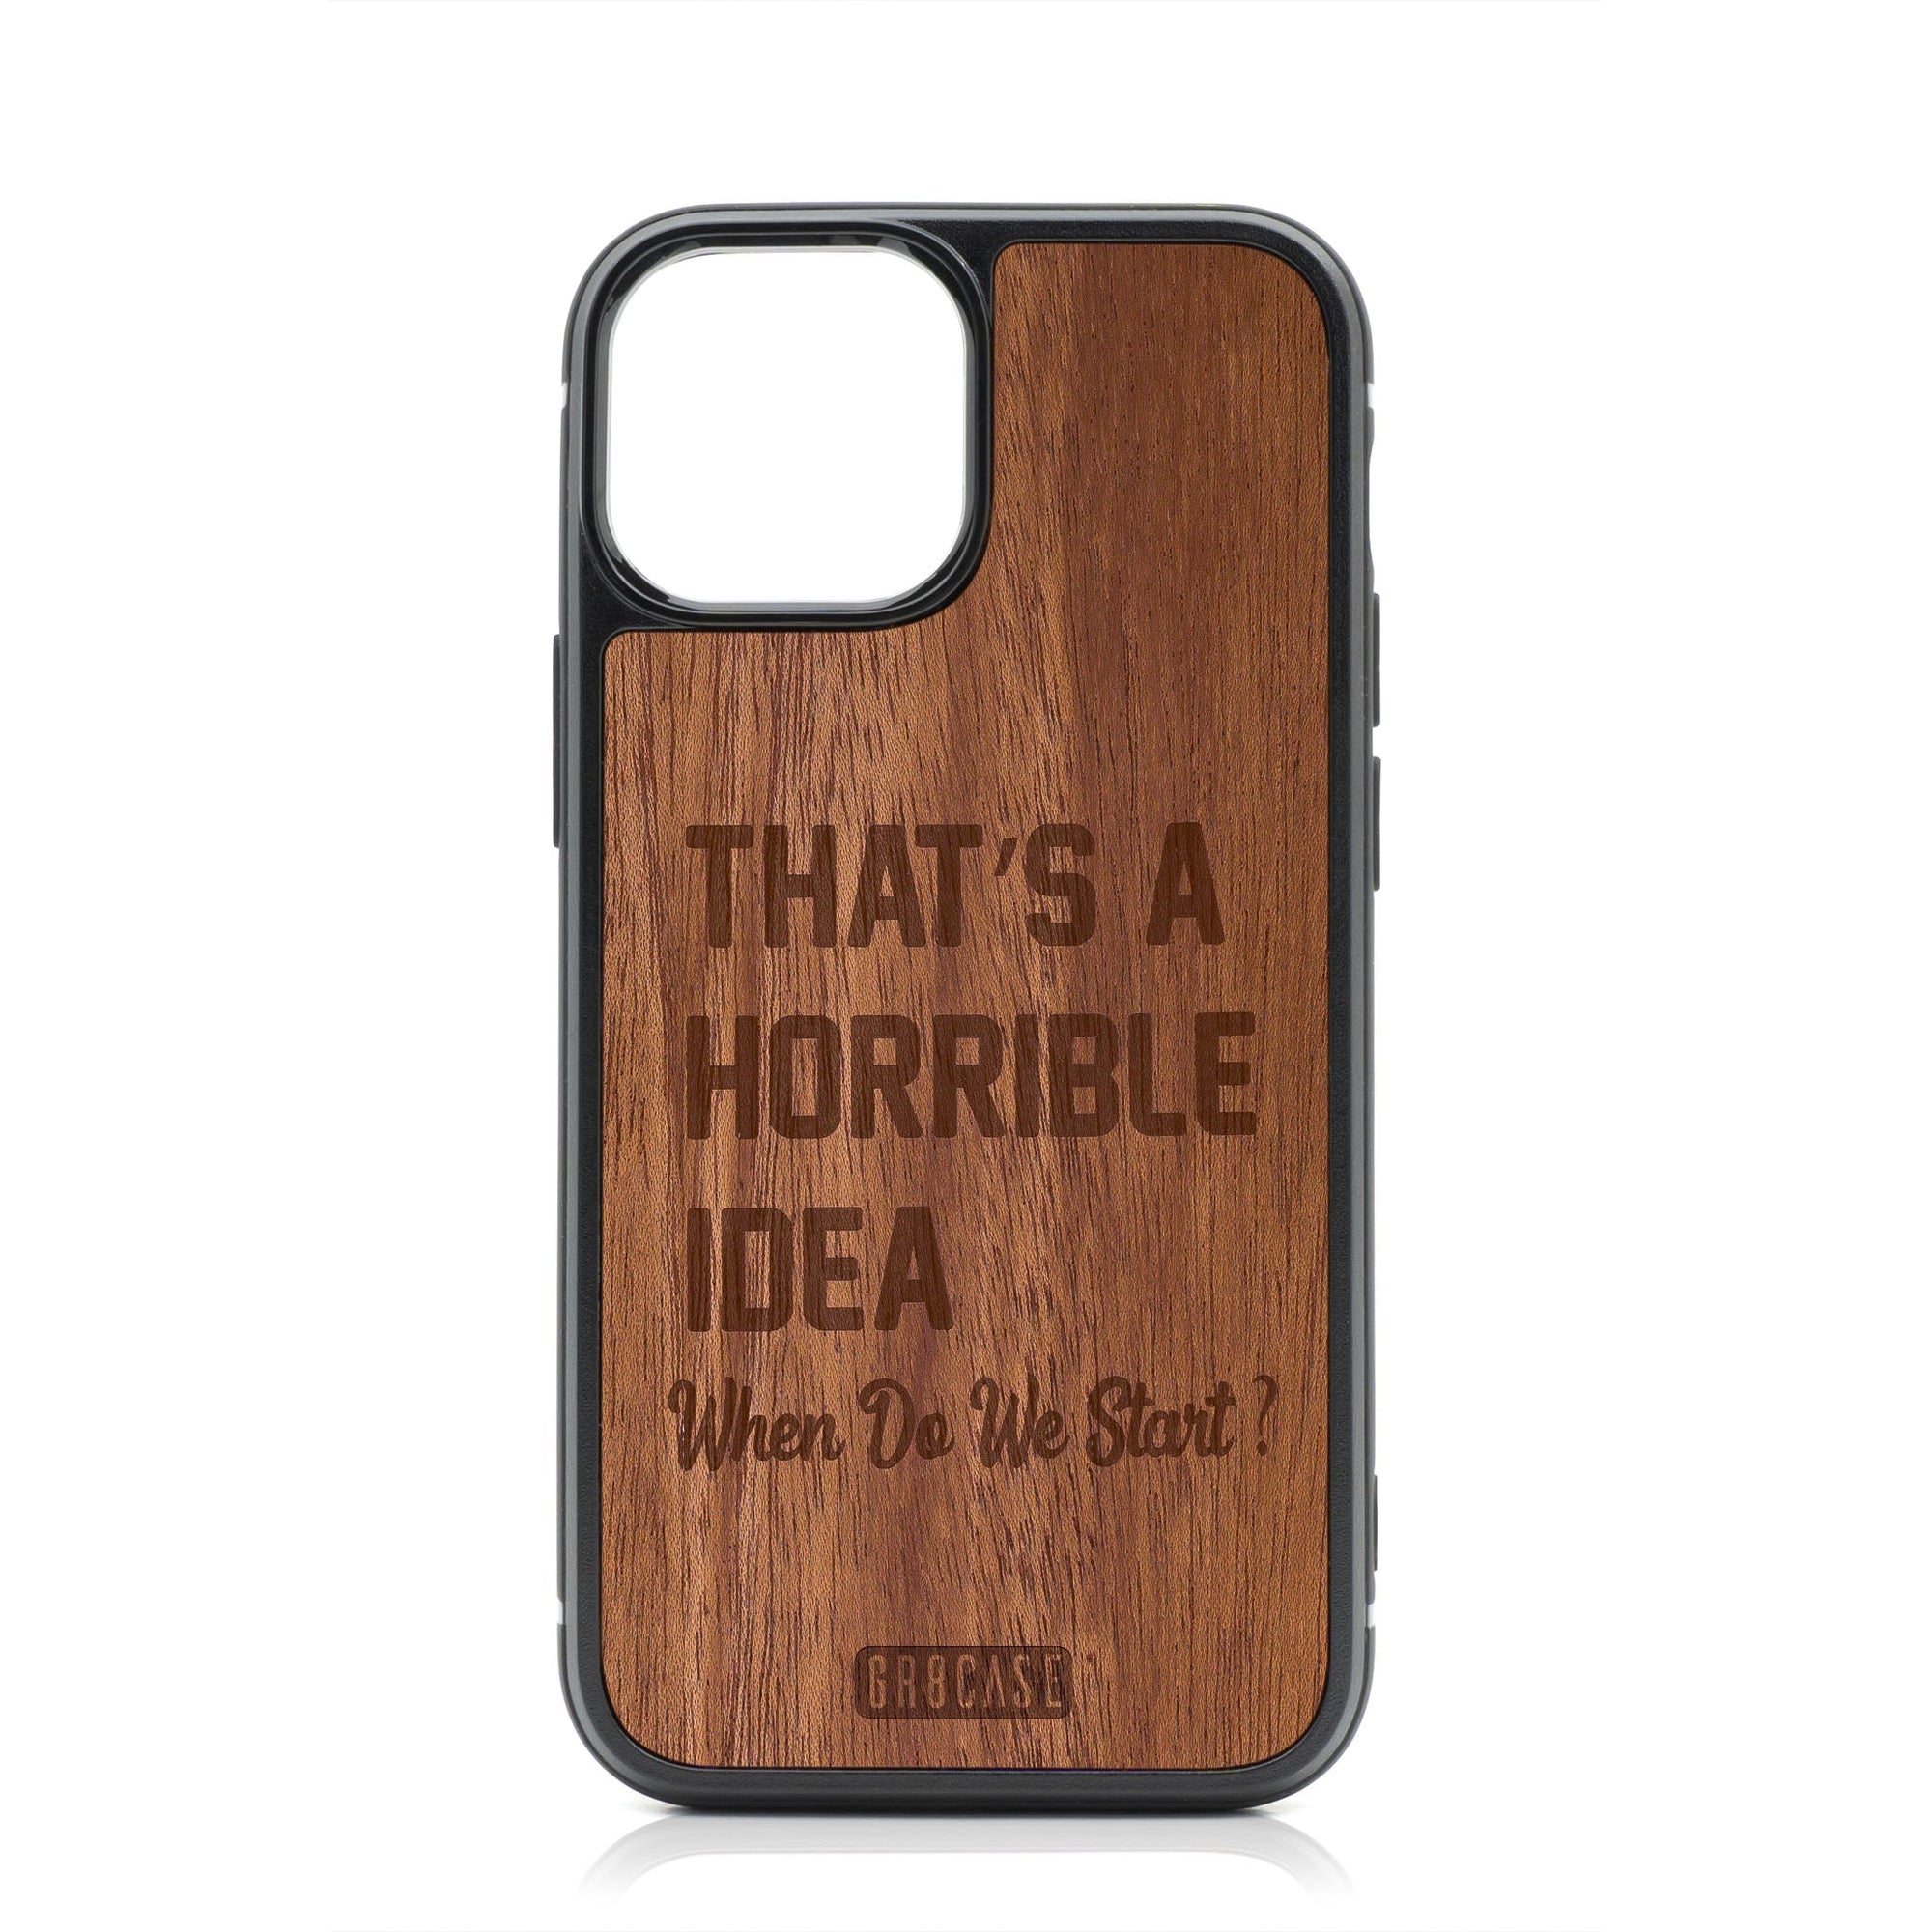 That's A Horrible Idea When Do We Start? Design Wood Case For iPhone 14 Plus